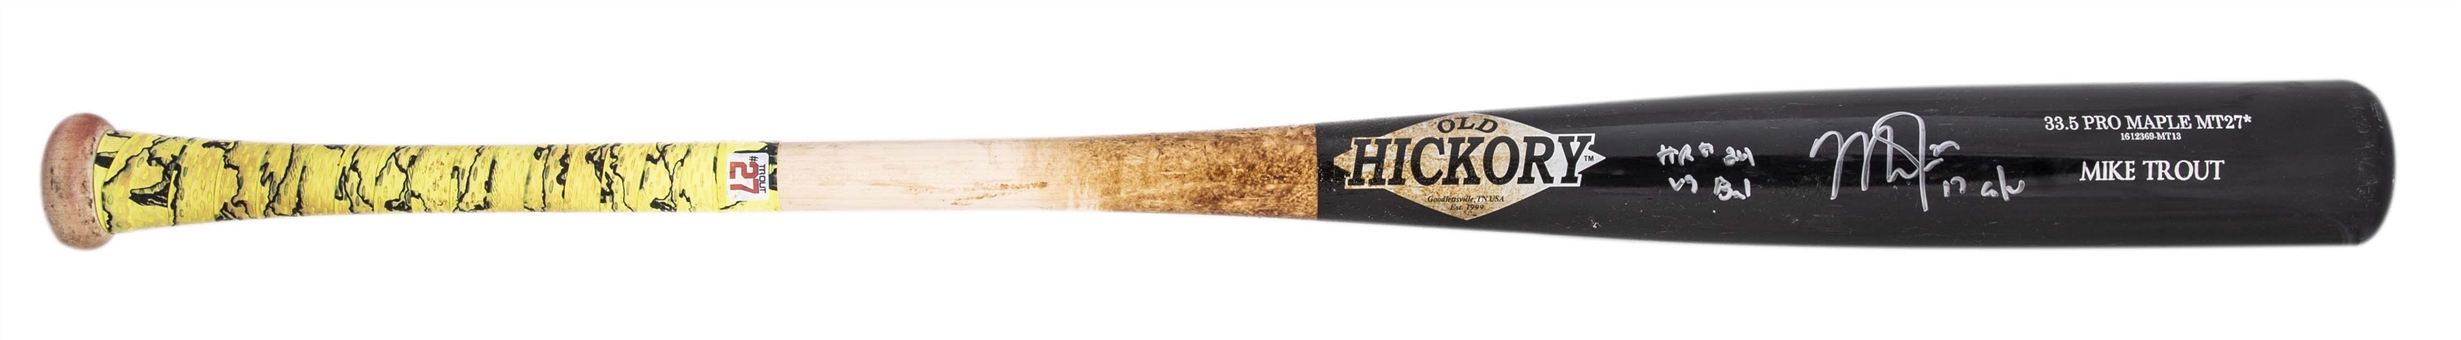 2017 Mike Trout Game Used & Signed Old Hickory MT27* Model Bat Photo Matched To Home Run #24 (PSA/DNA GU 10 & Anderson Authentics)